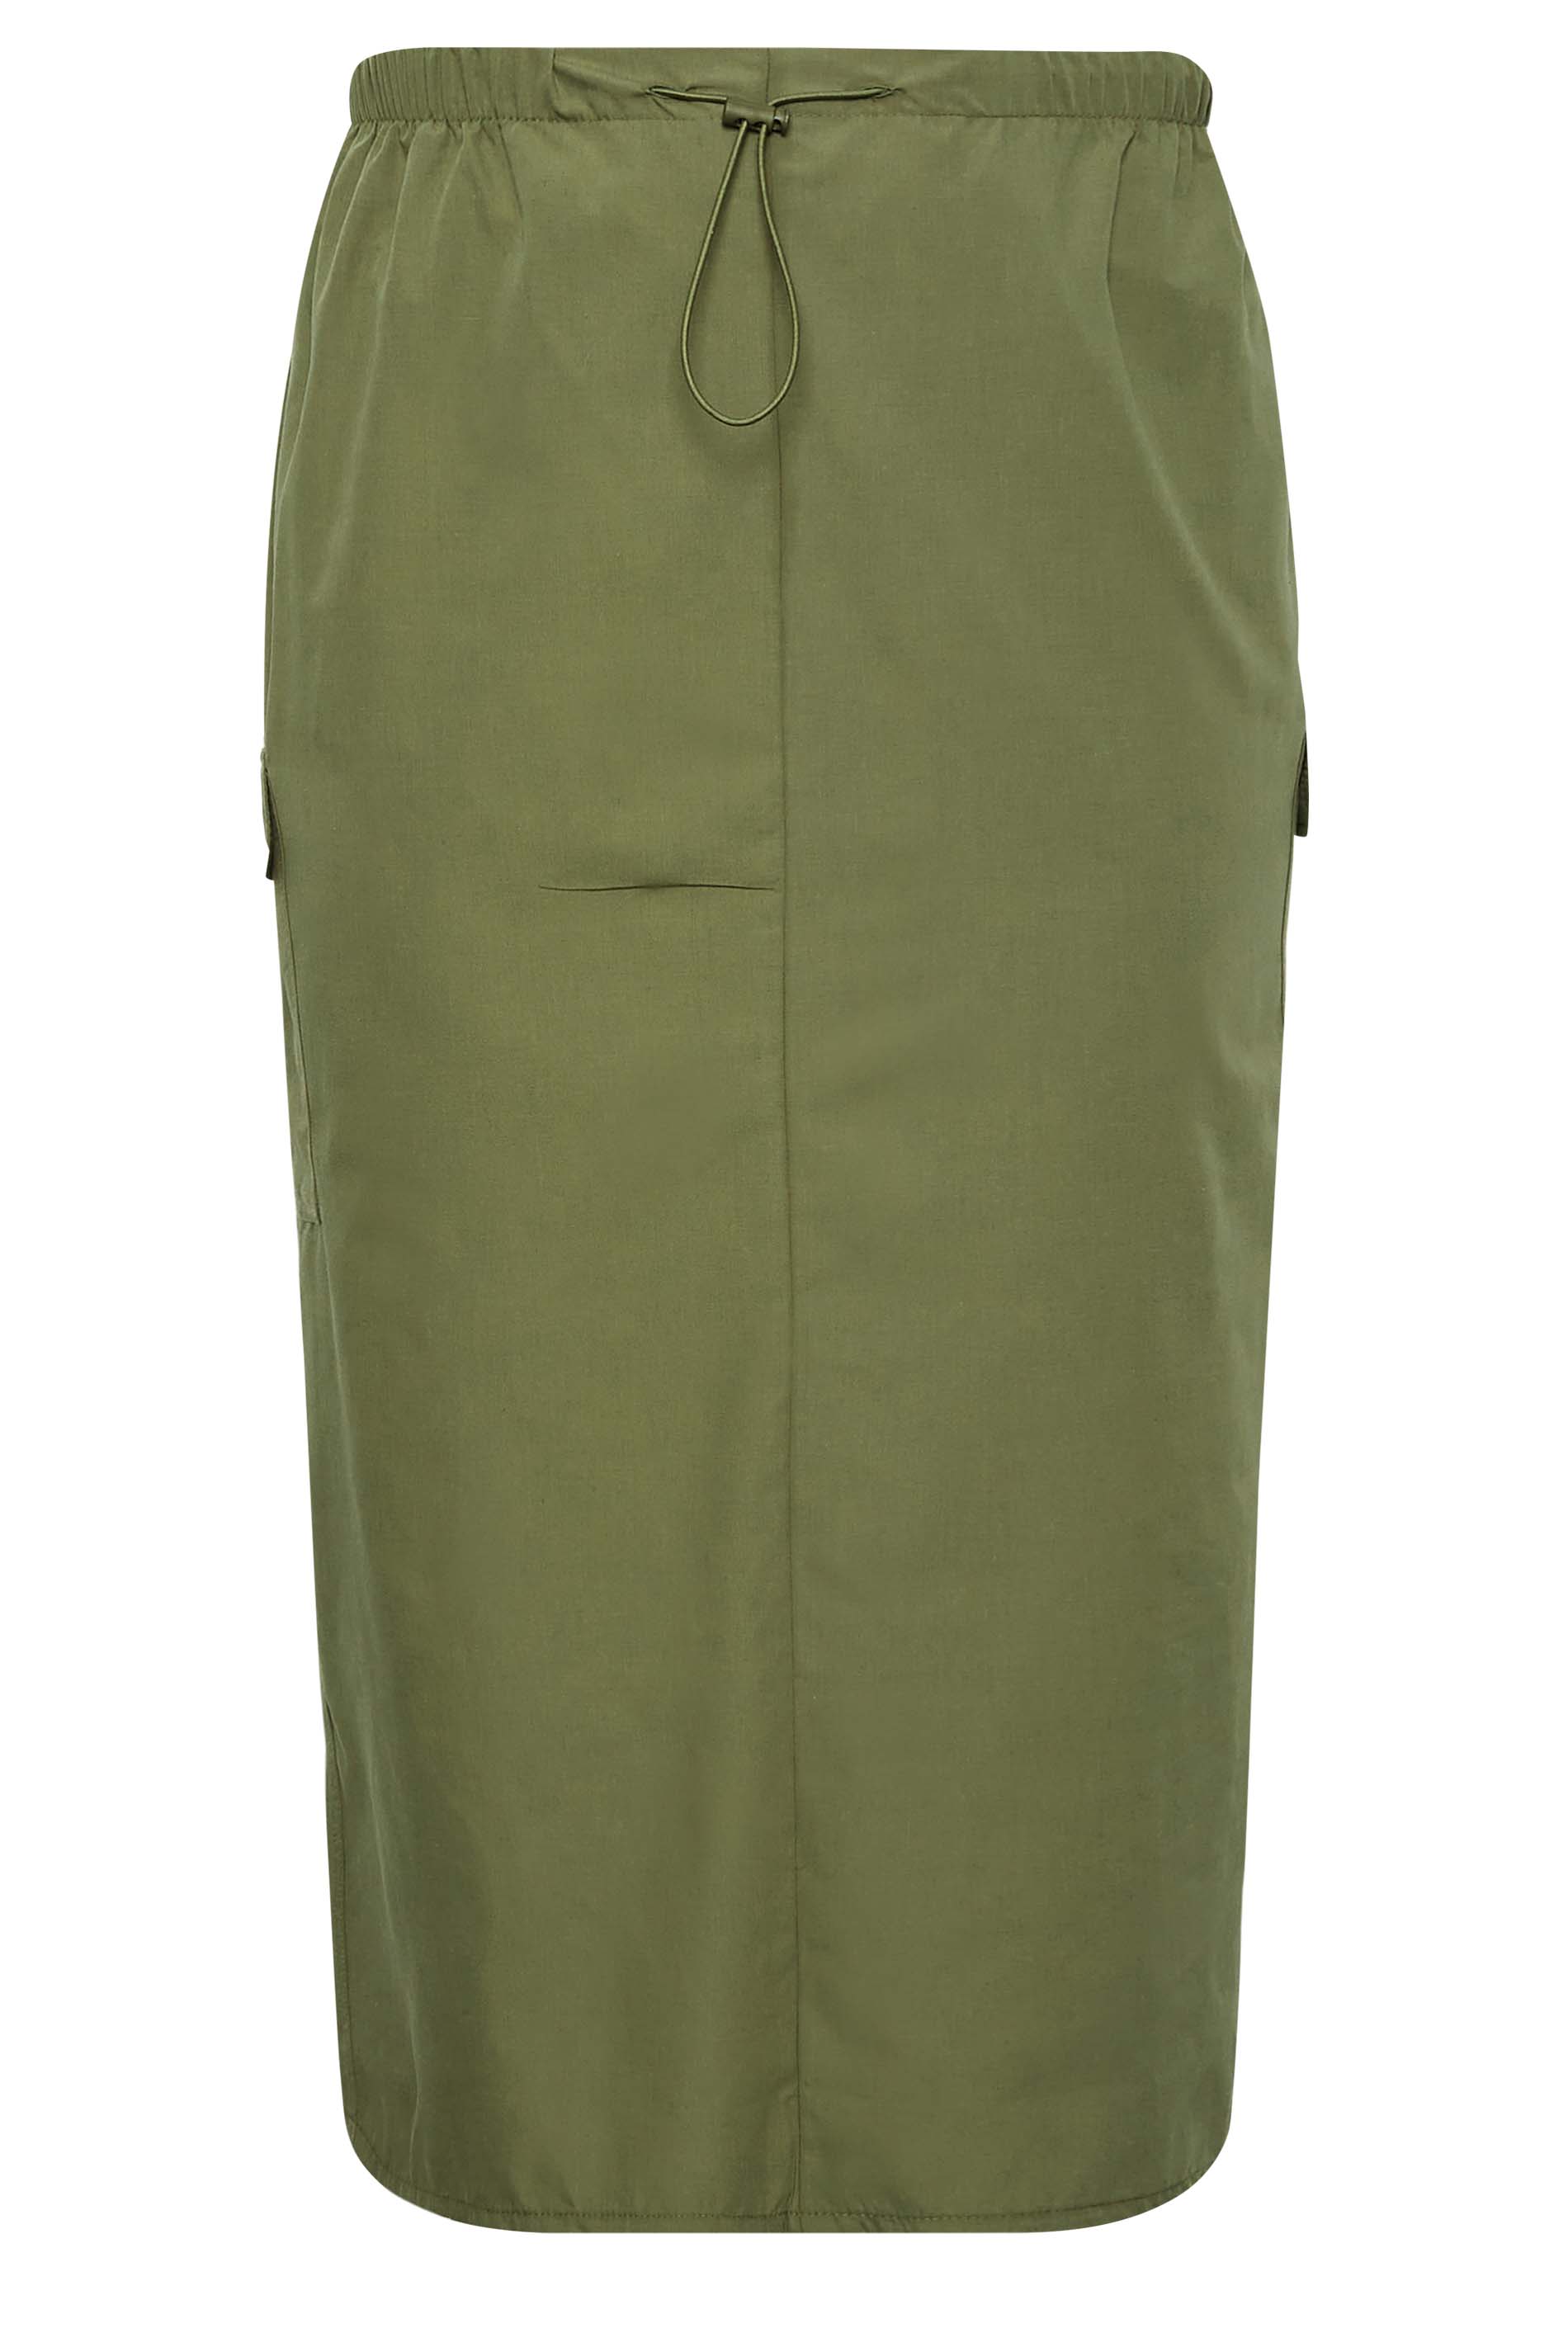 YOURS Plus Size Curve Khaki Green Cargo Skirt | Yours Clothing